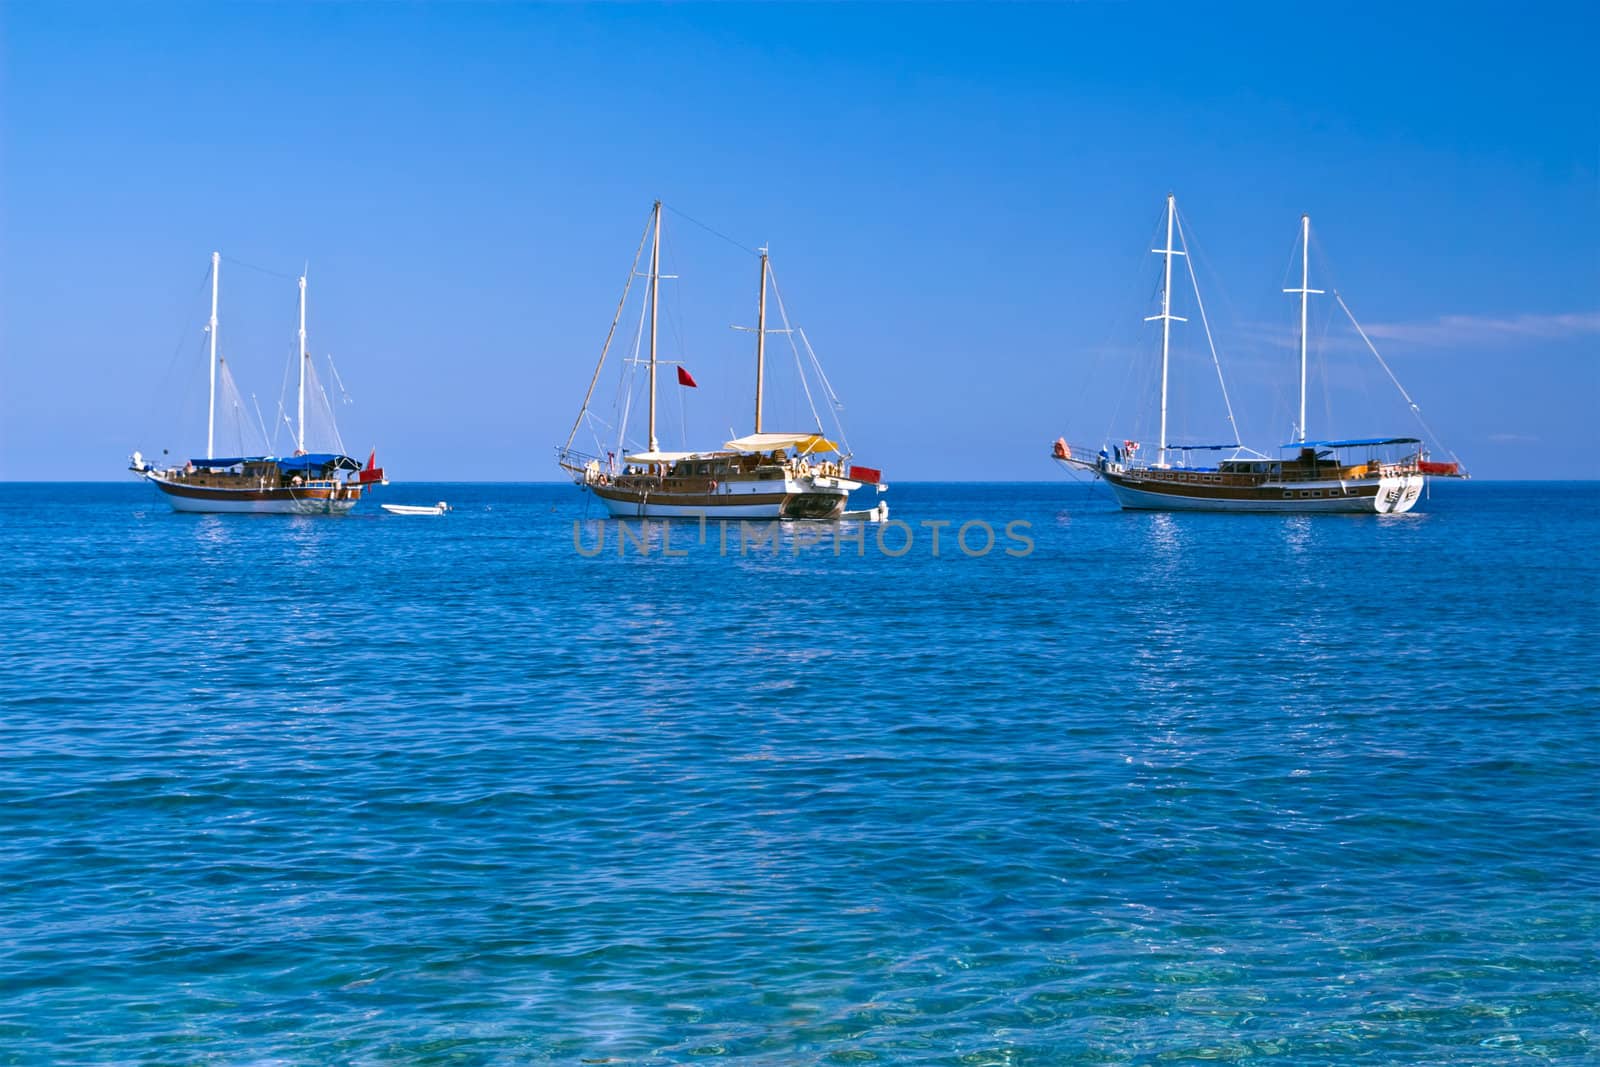 Three sailboats in sunny weather, with copyspace by Keetten_Predators